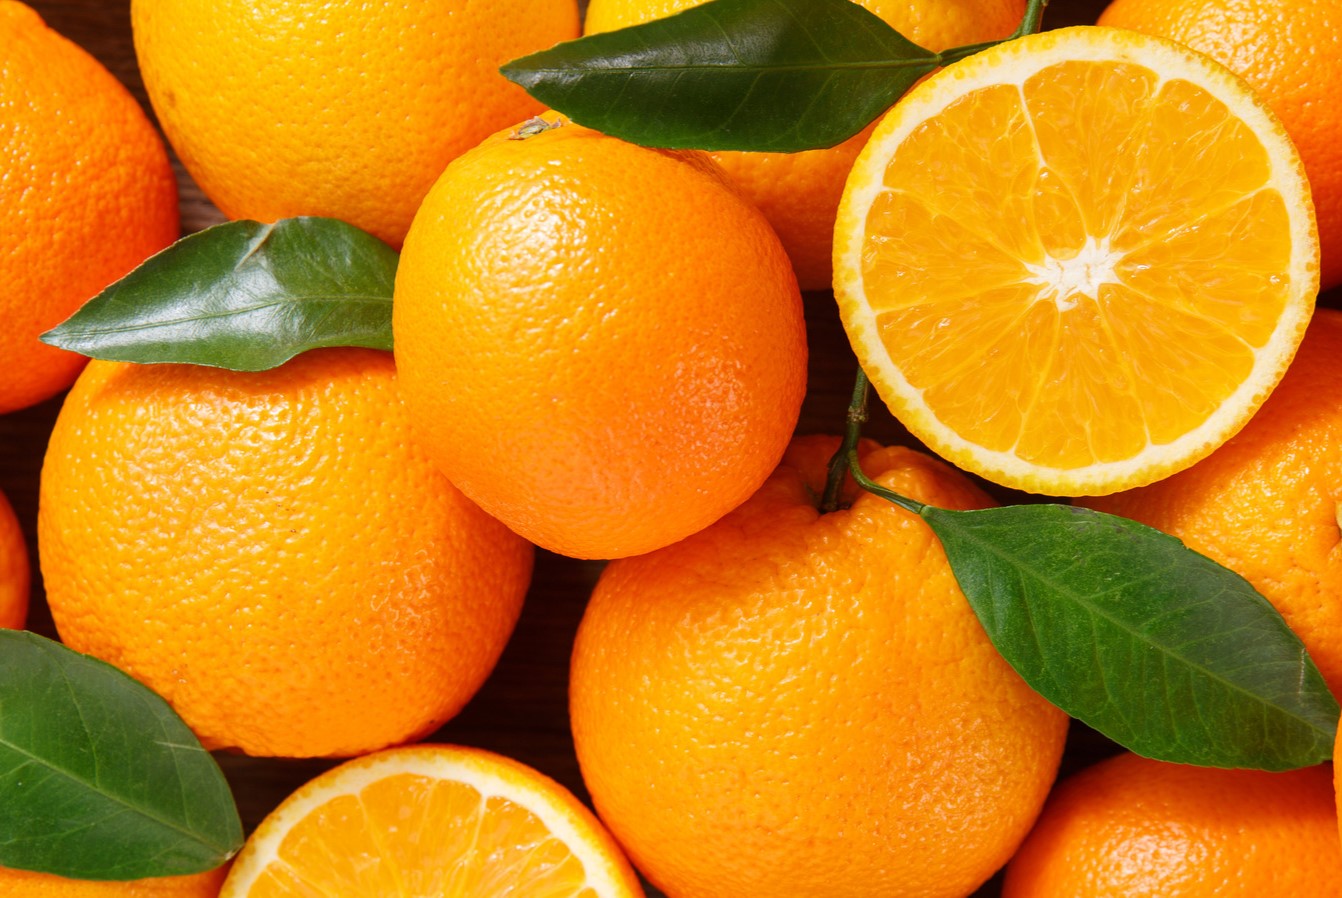 How To Grow Clementines Without Seeds